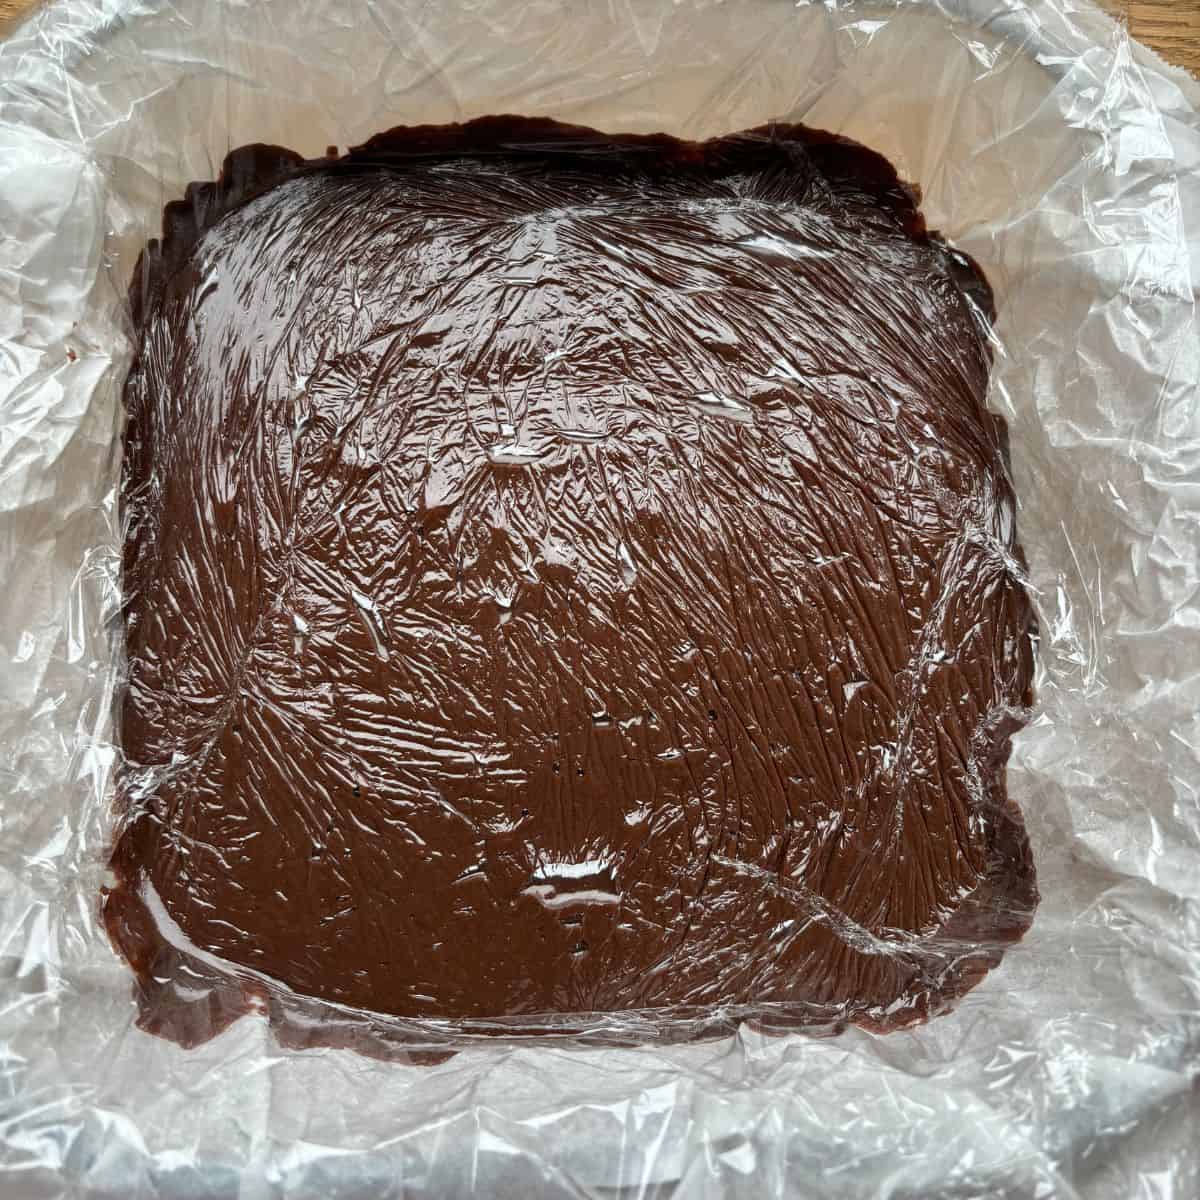 Fudge in lined dish covered with plastic wrap.